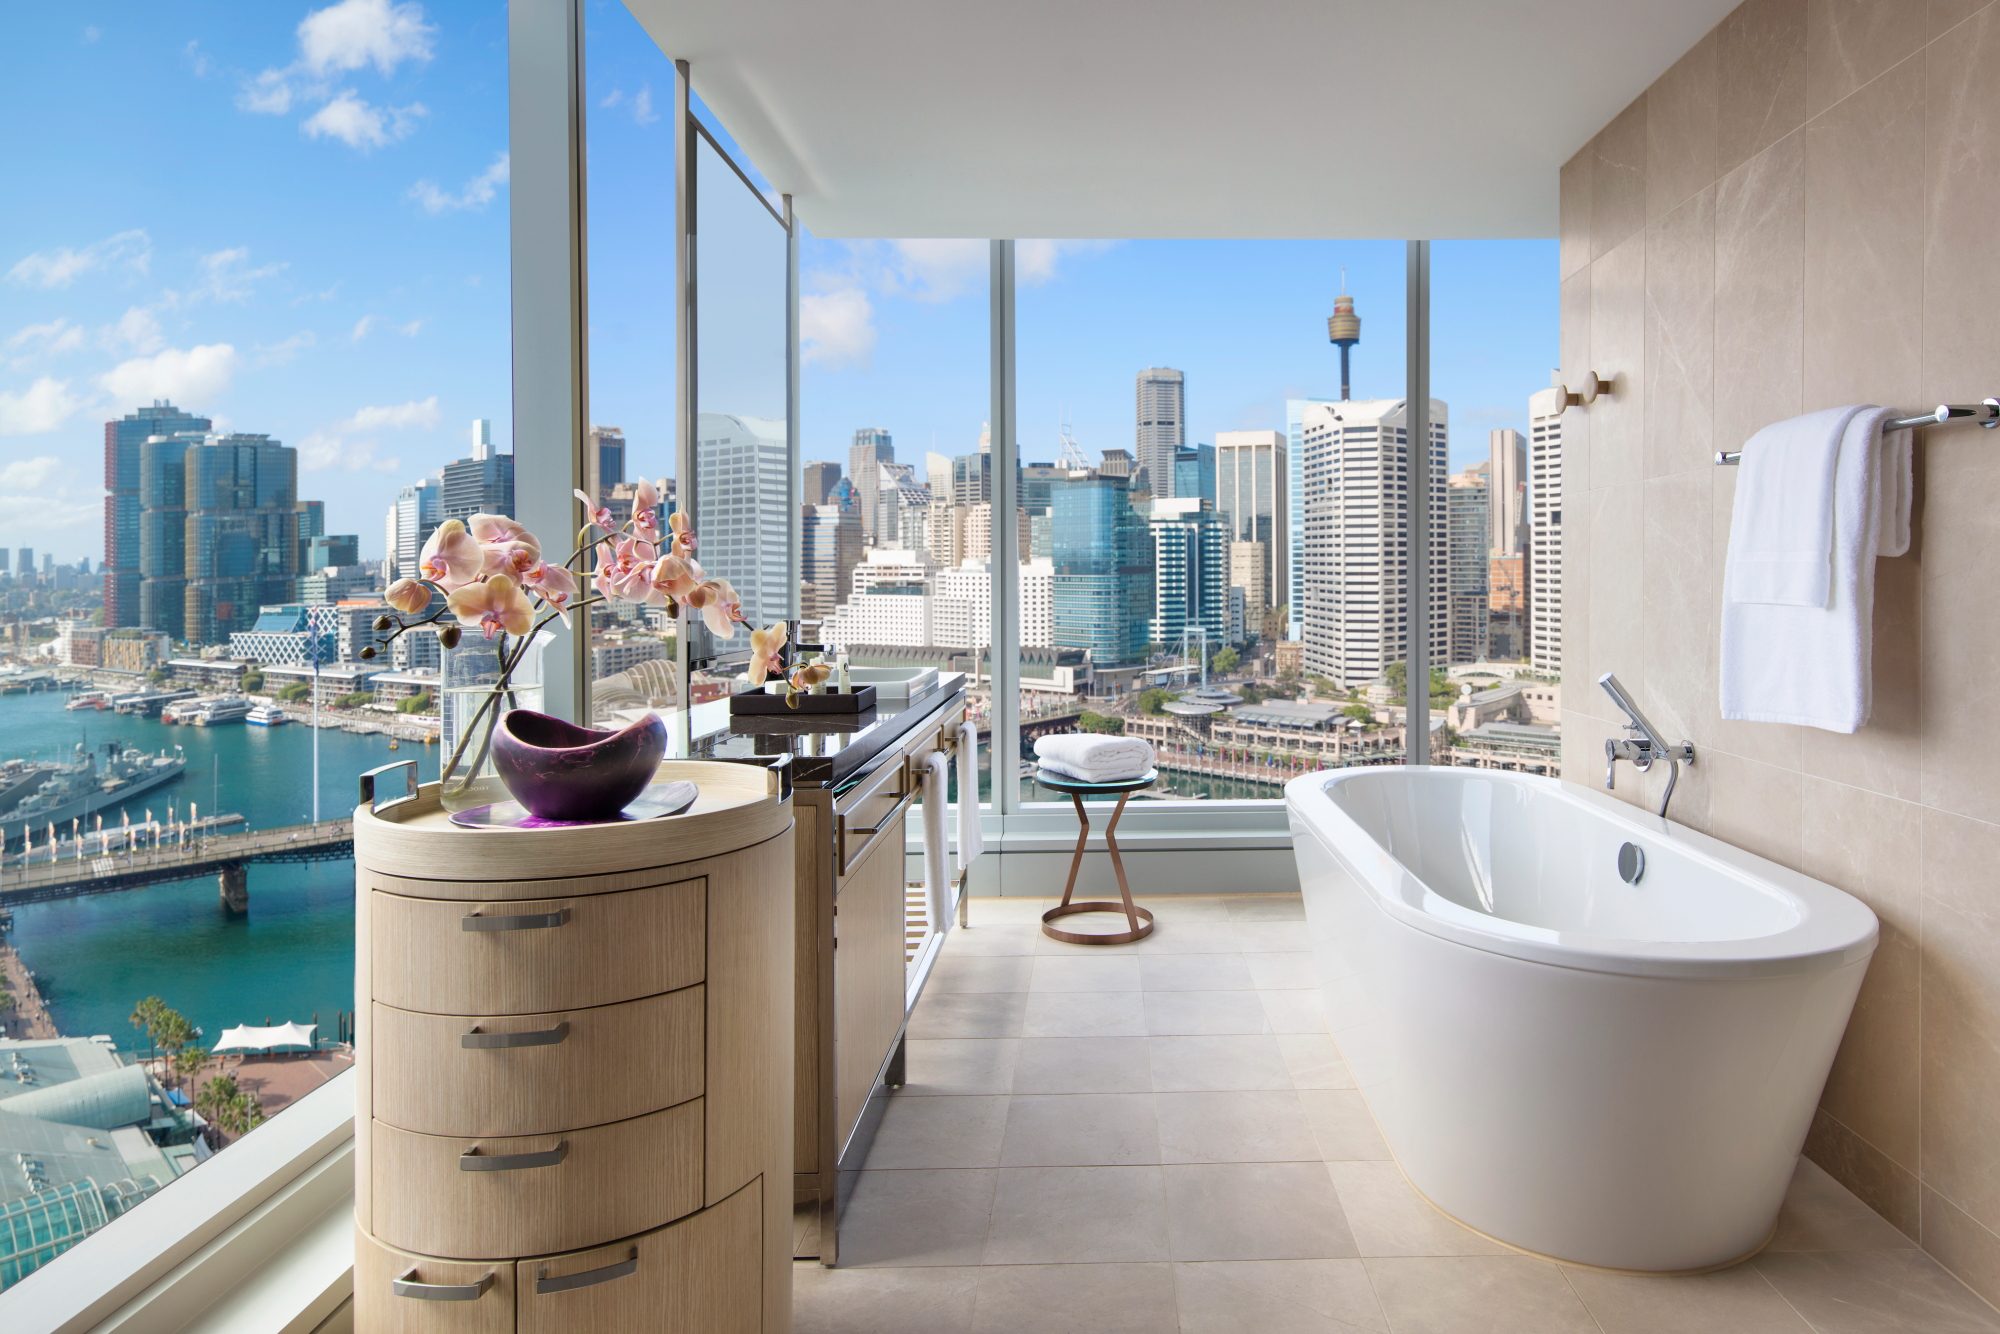 Not only does the Sofitel Sydney Darling Harbour have one of the coolest Champagne Bars in the southern hemisphere, it also has some pretty amazing bathrooms too!. More: https://www.asiatraveltips.com/news17/1011-SofitelSydney.shtml Click to enlarge.